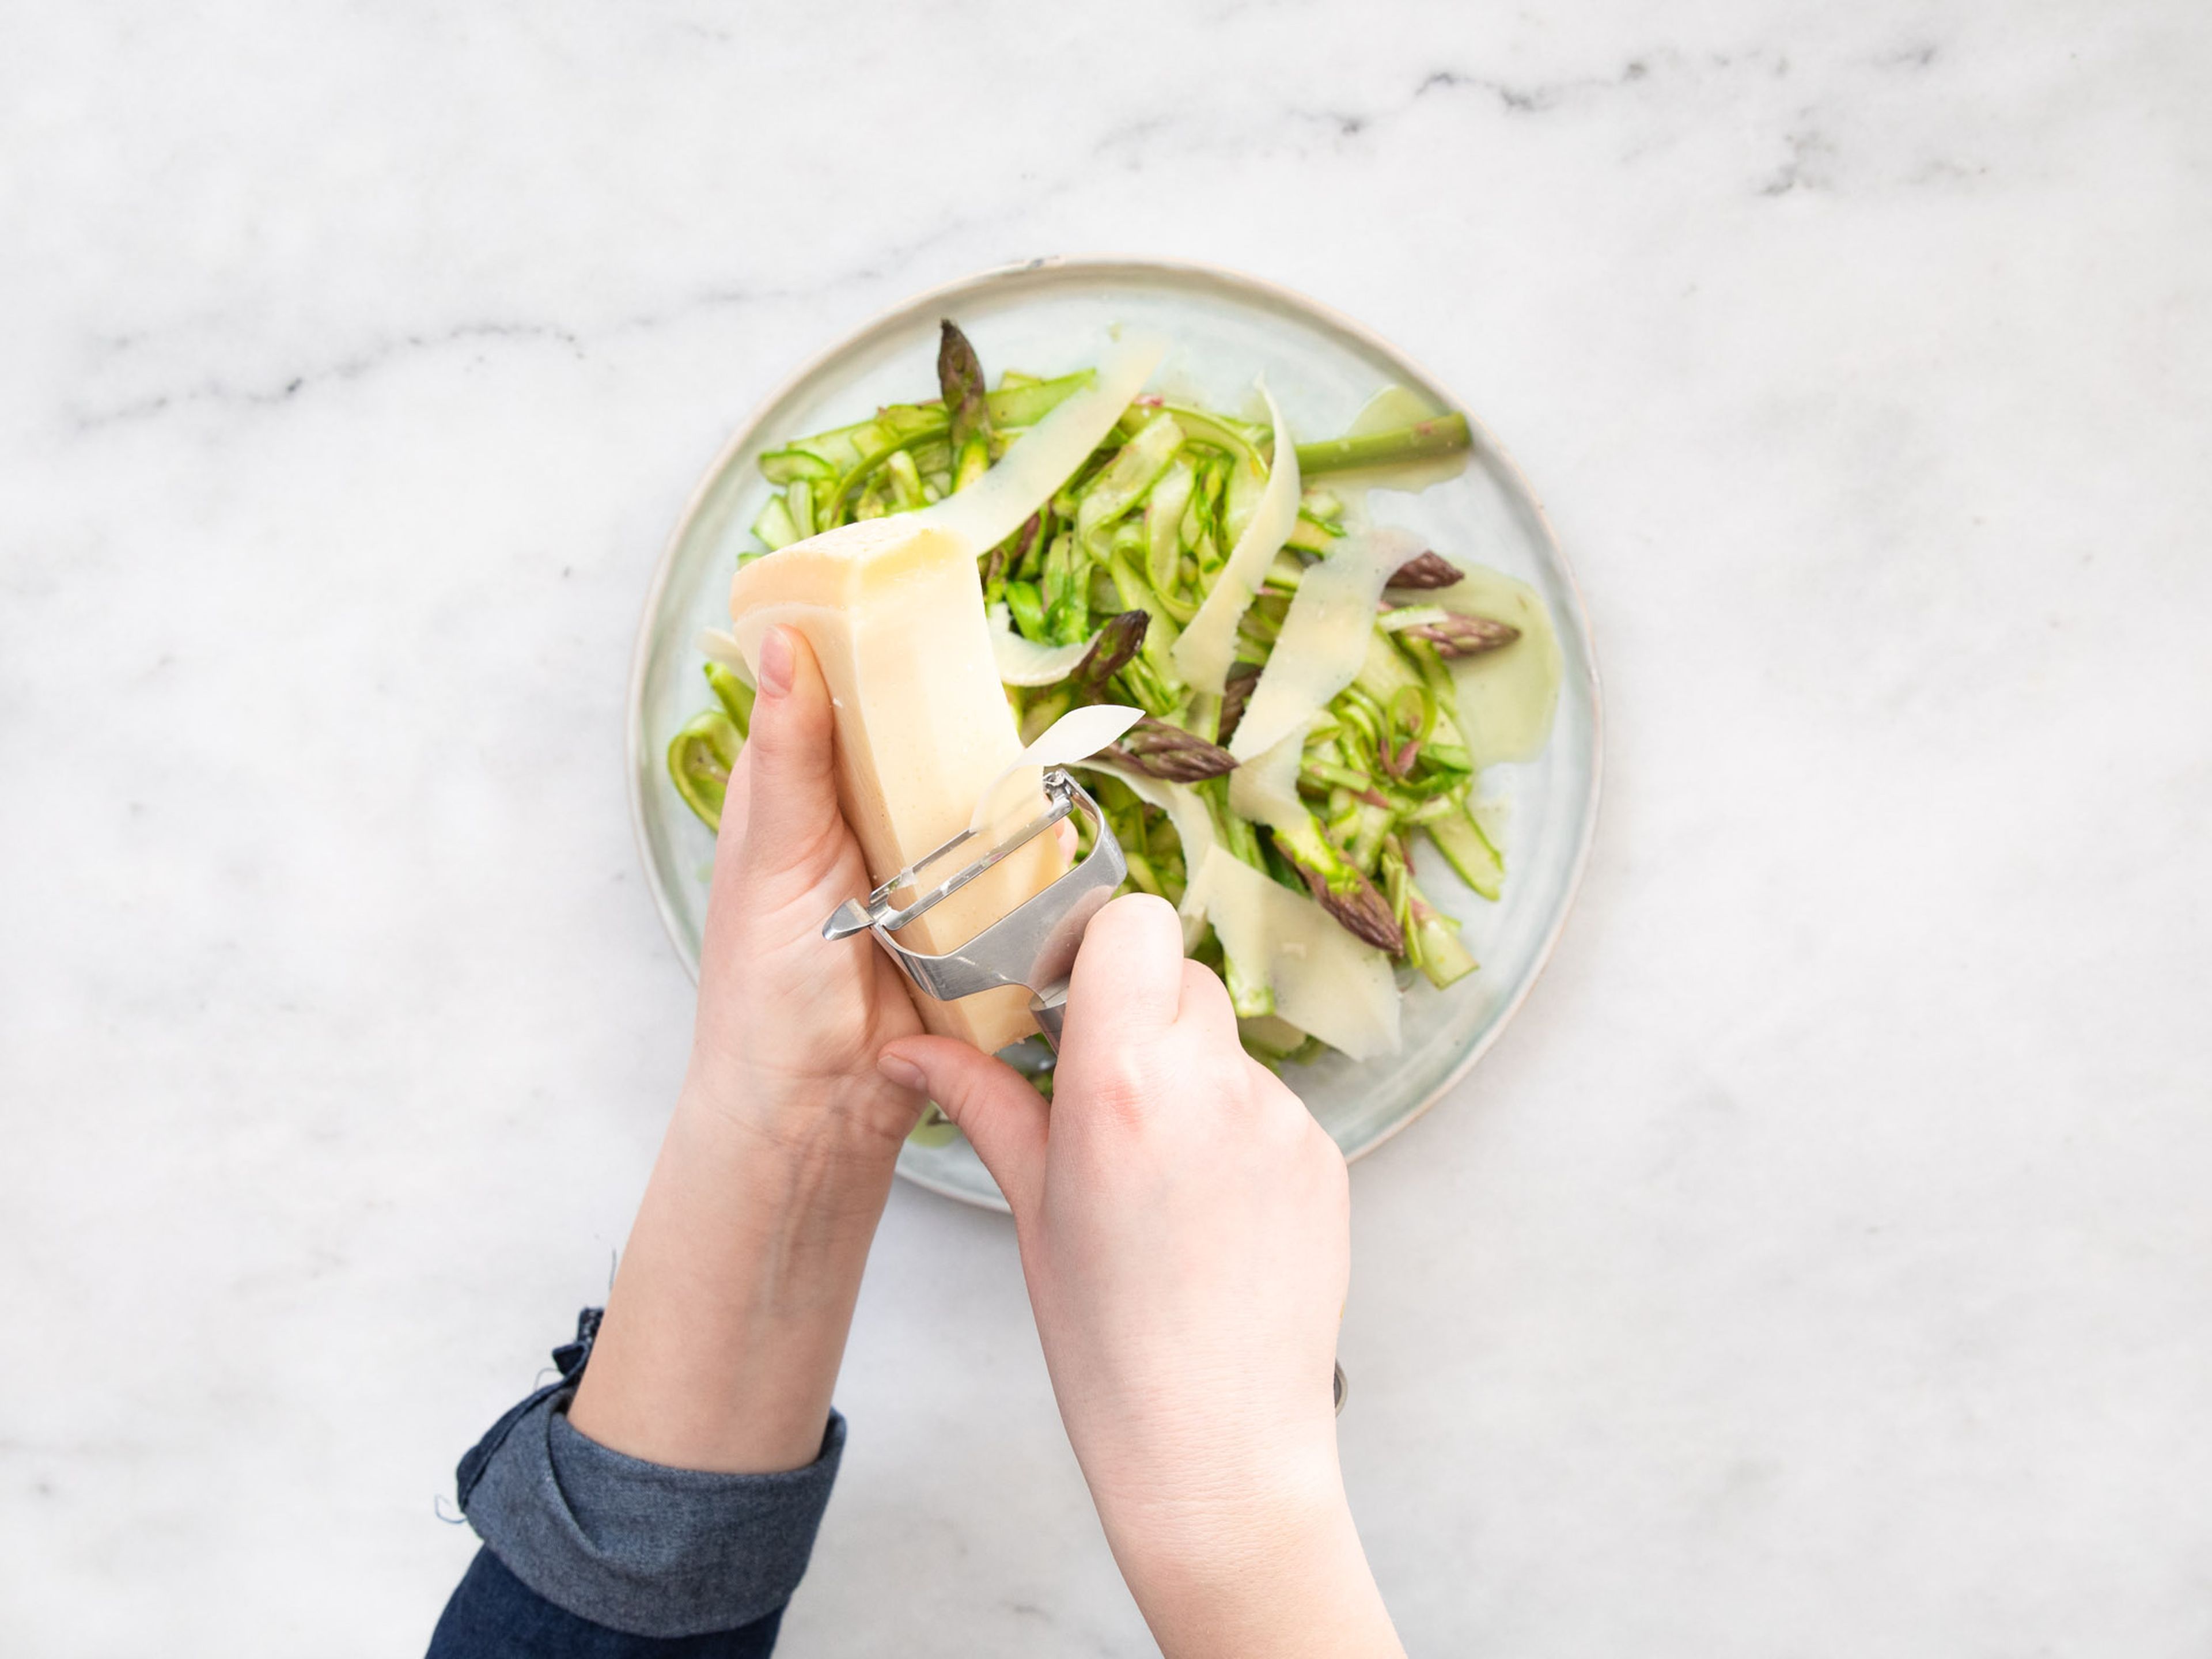 Toss the asparagus and the dressing together. Let sit approx. 5 min before serving. Serve salad, use a peeler to shave wide strips of freshly-shaved Parmesan on top and garnish with fresh thyme leaves. Enjoy!